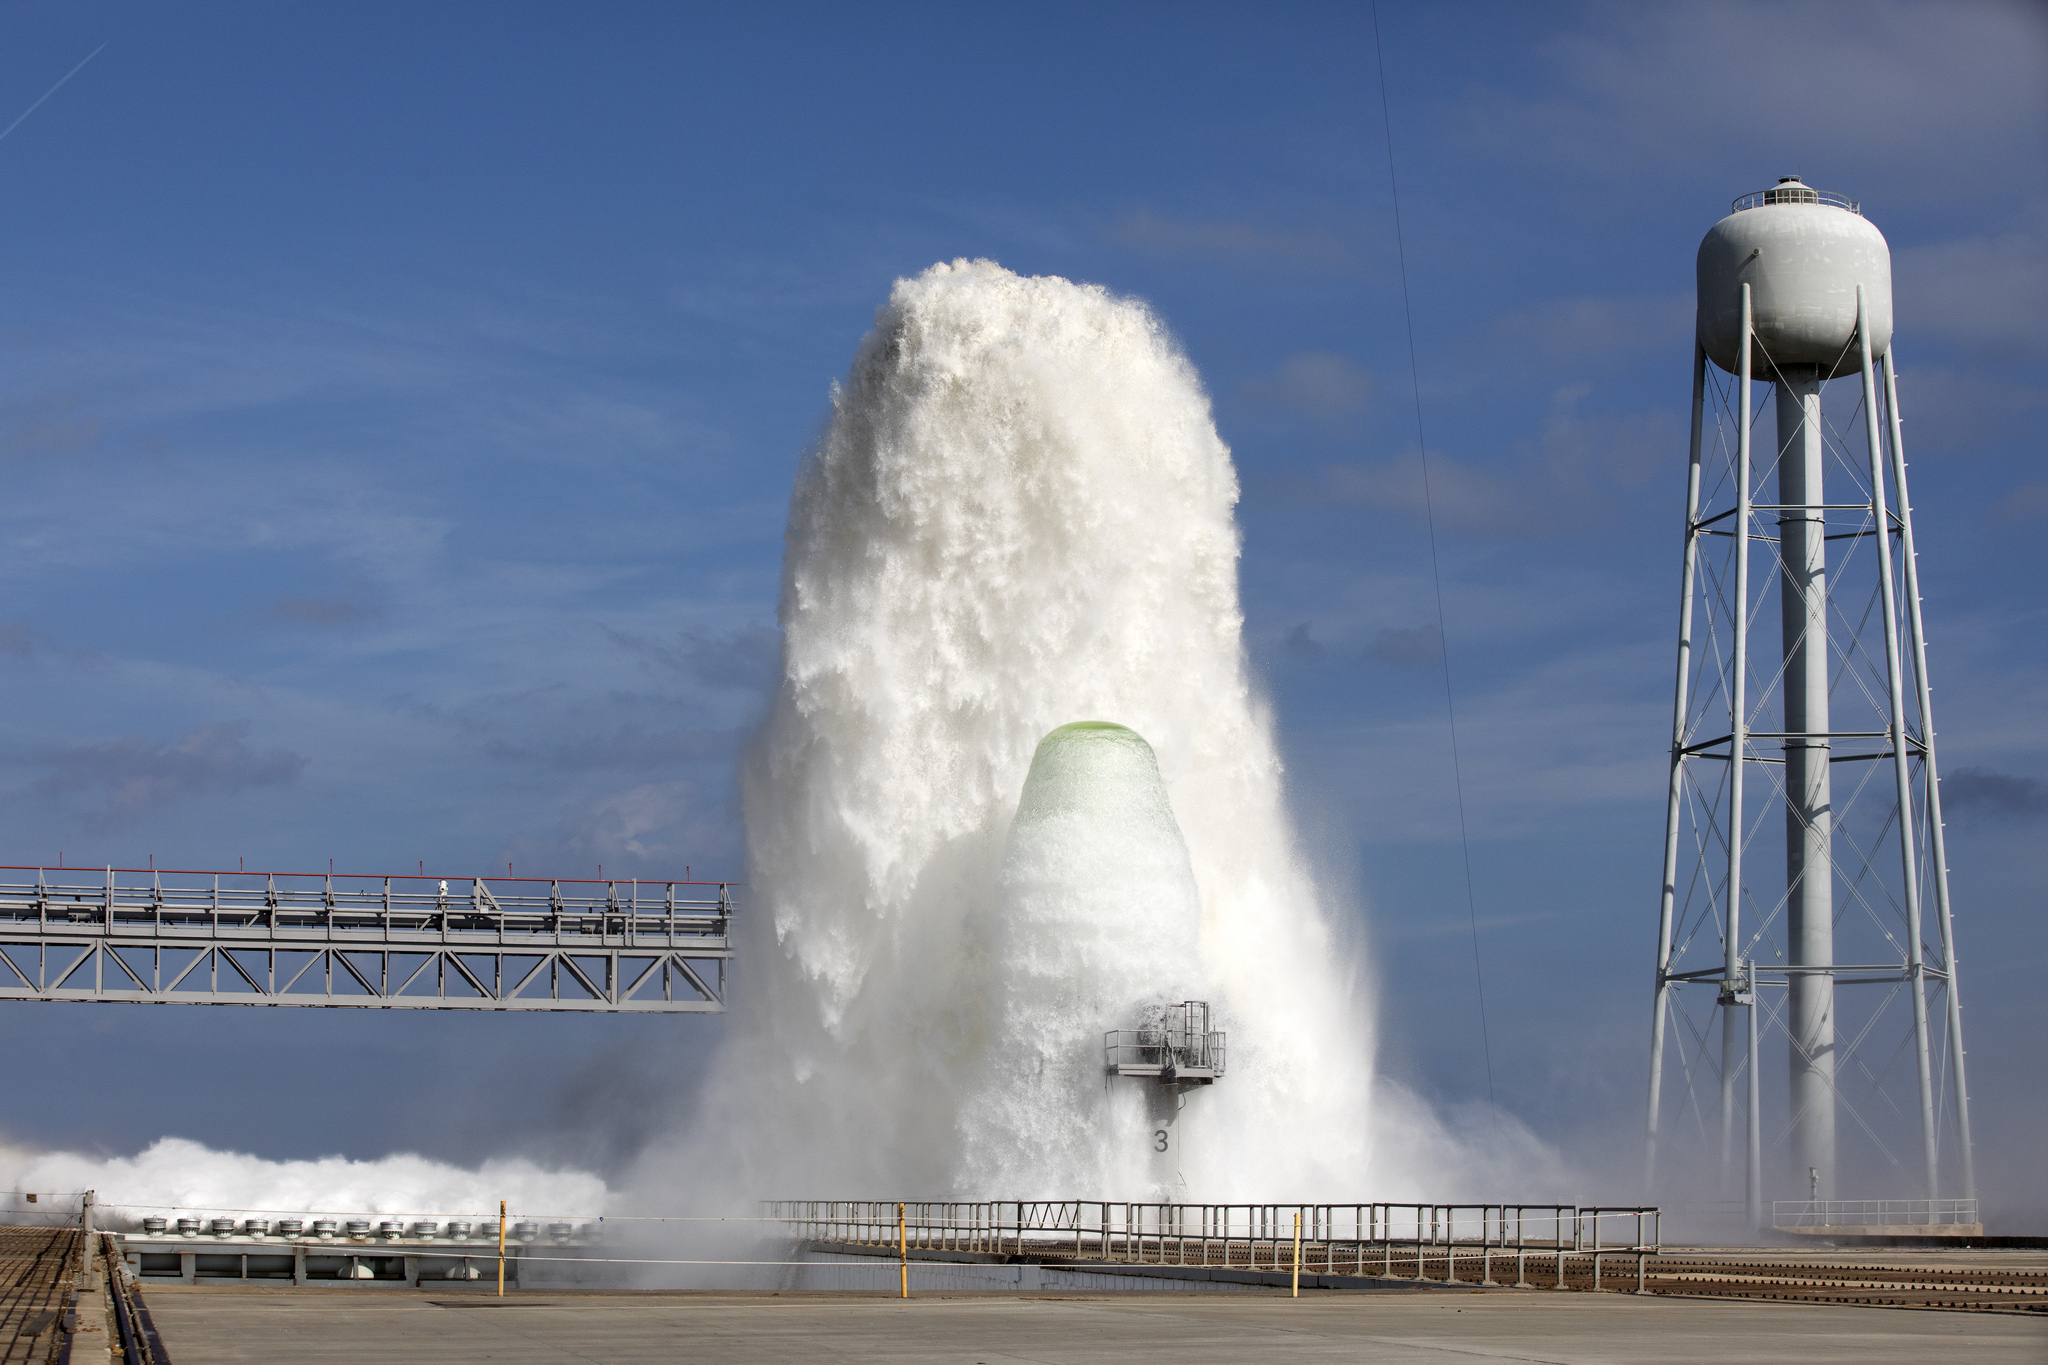 A water deluge test at Launch Pad 39B at Kennedy Space Center in Florida.